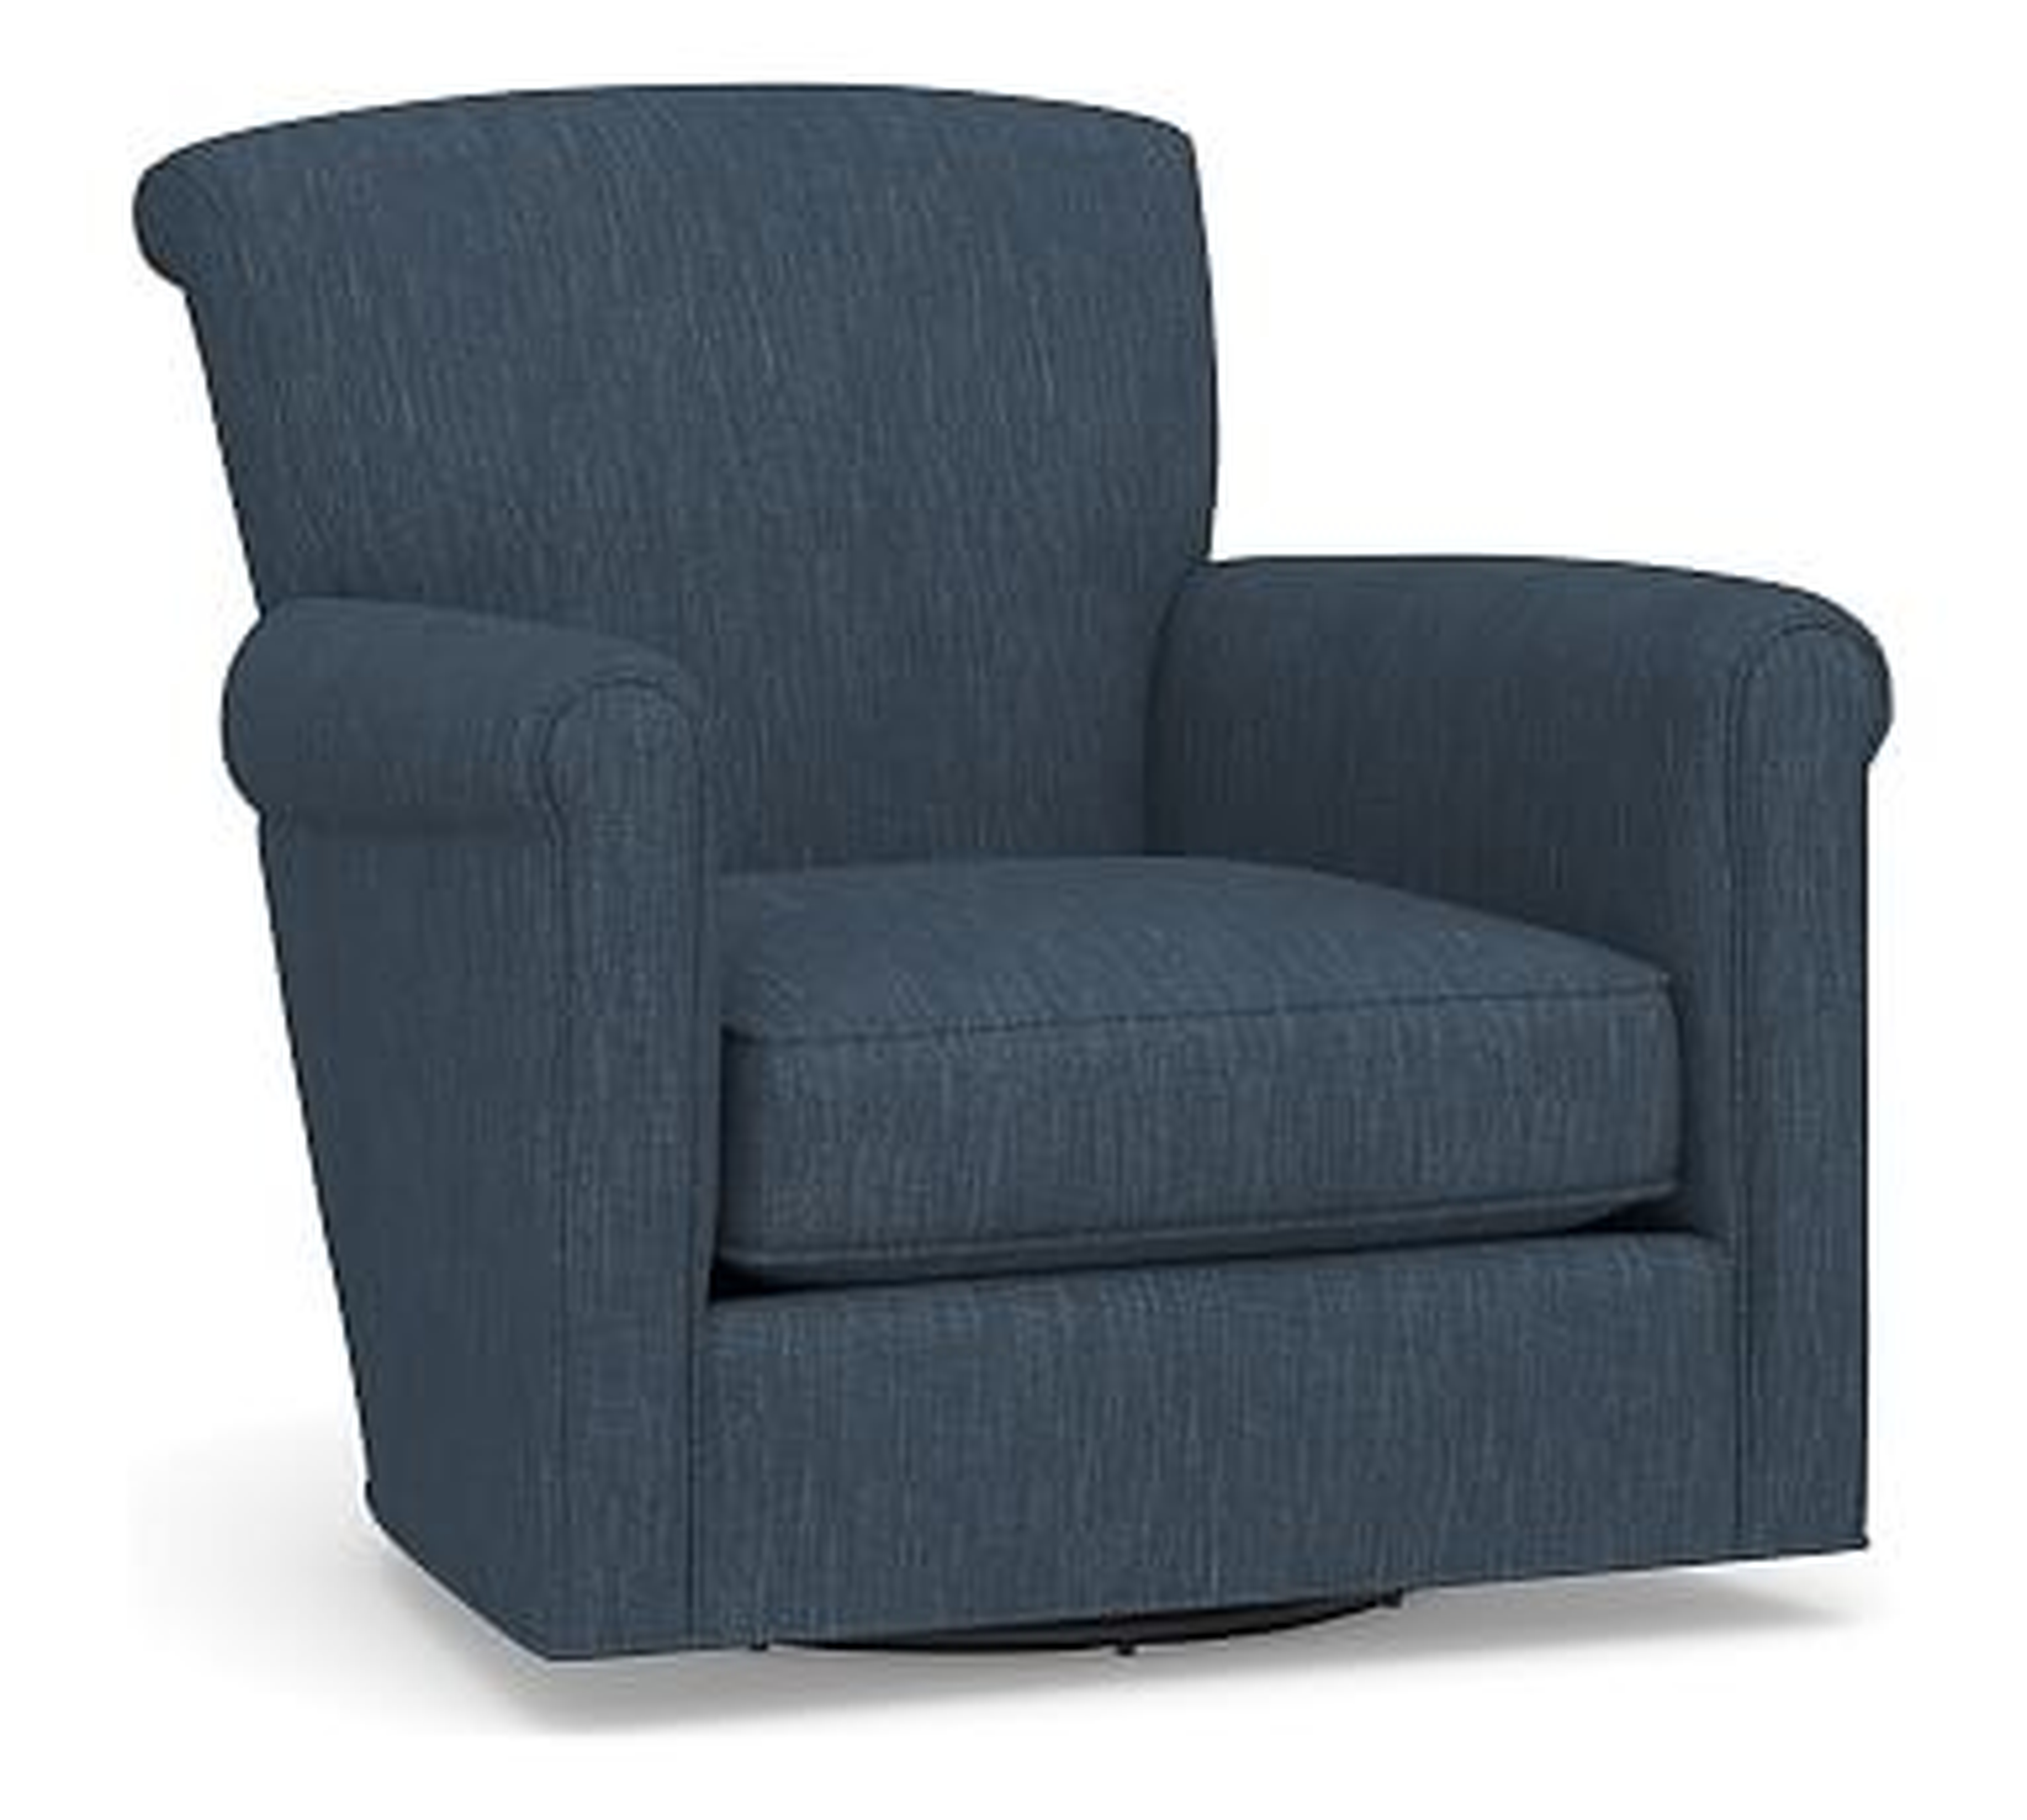 Irving Roll Arm Upholstered Swivel Armchair without Nailheads, Polyester Wrapped Cushions, Performance Heathered Tweed Indigo - Pottery Barn